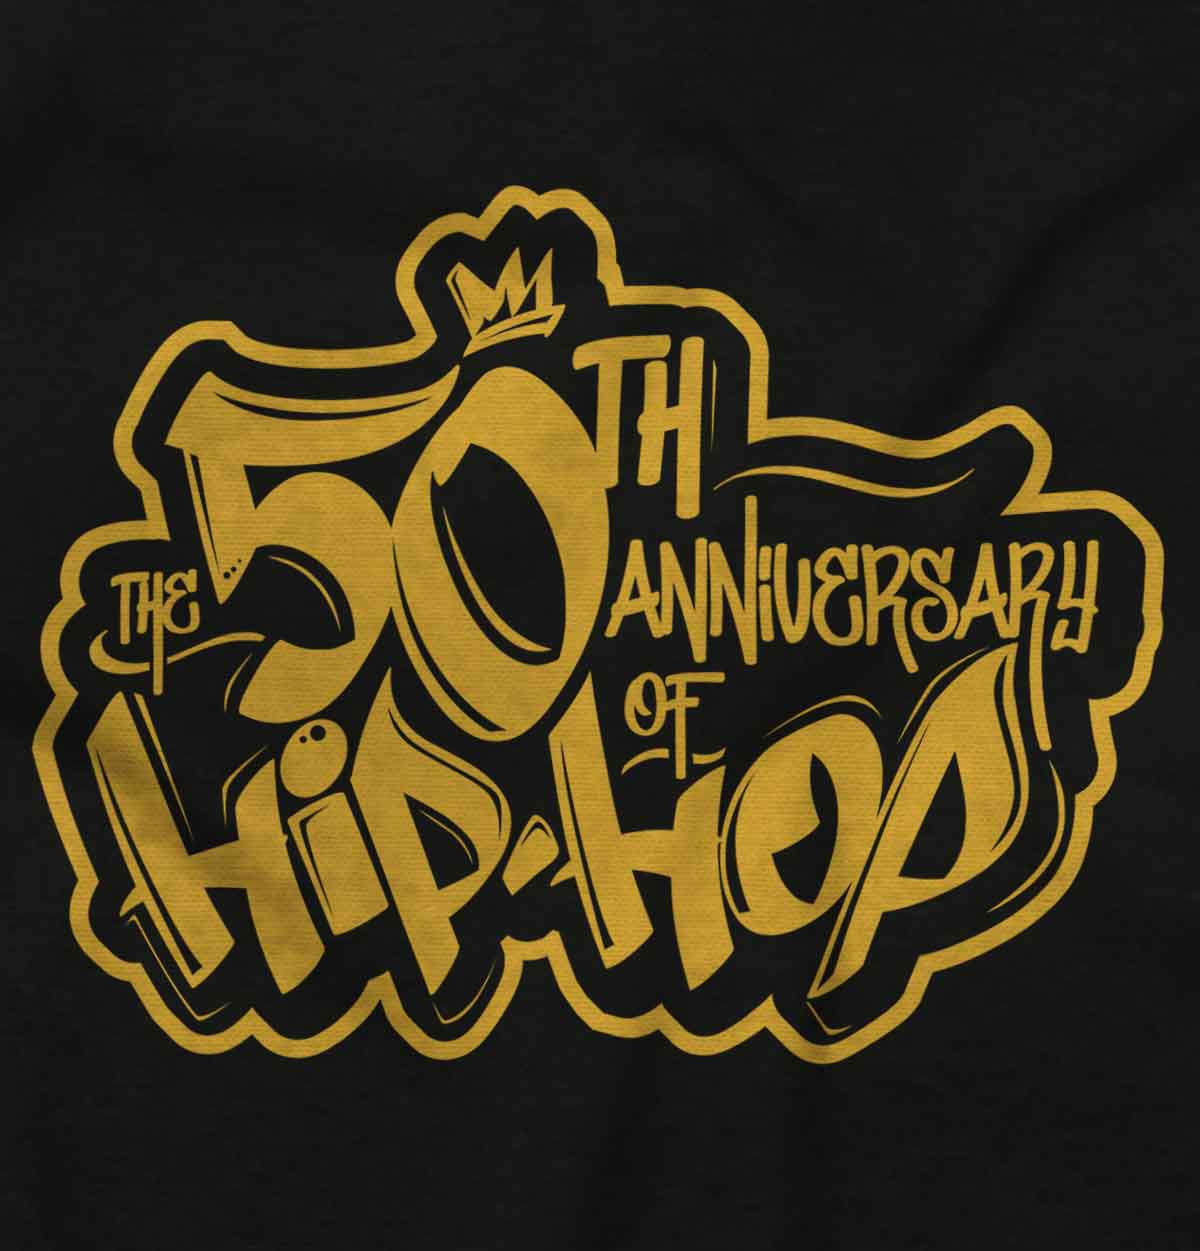 A picture honoring the birth of HipHop in 1973, showing a vintage design that takes us back to DJ Kool Herc's never-ending house party at 1520 Sedgwick Ave.